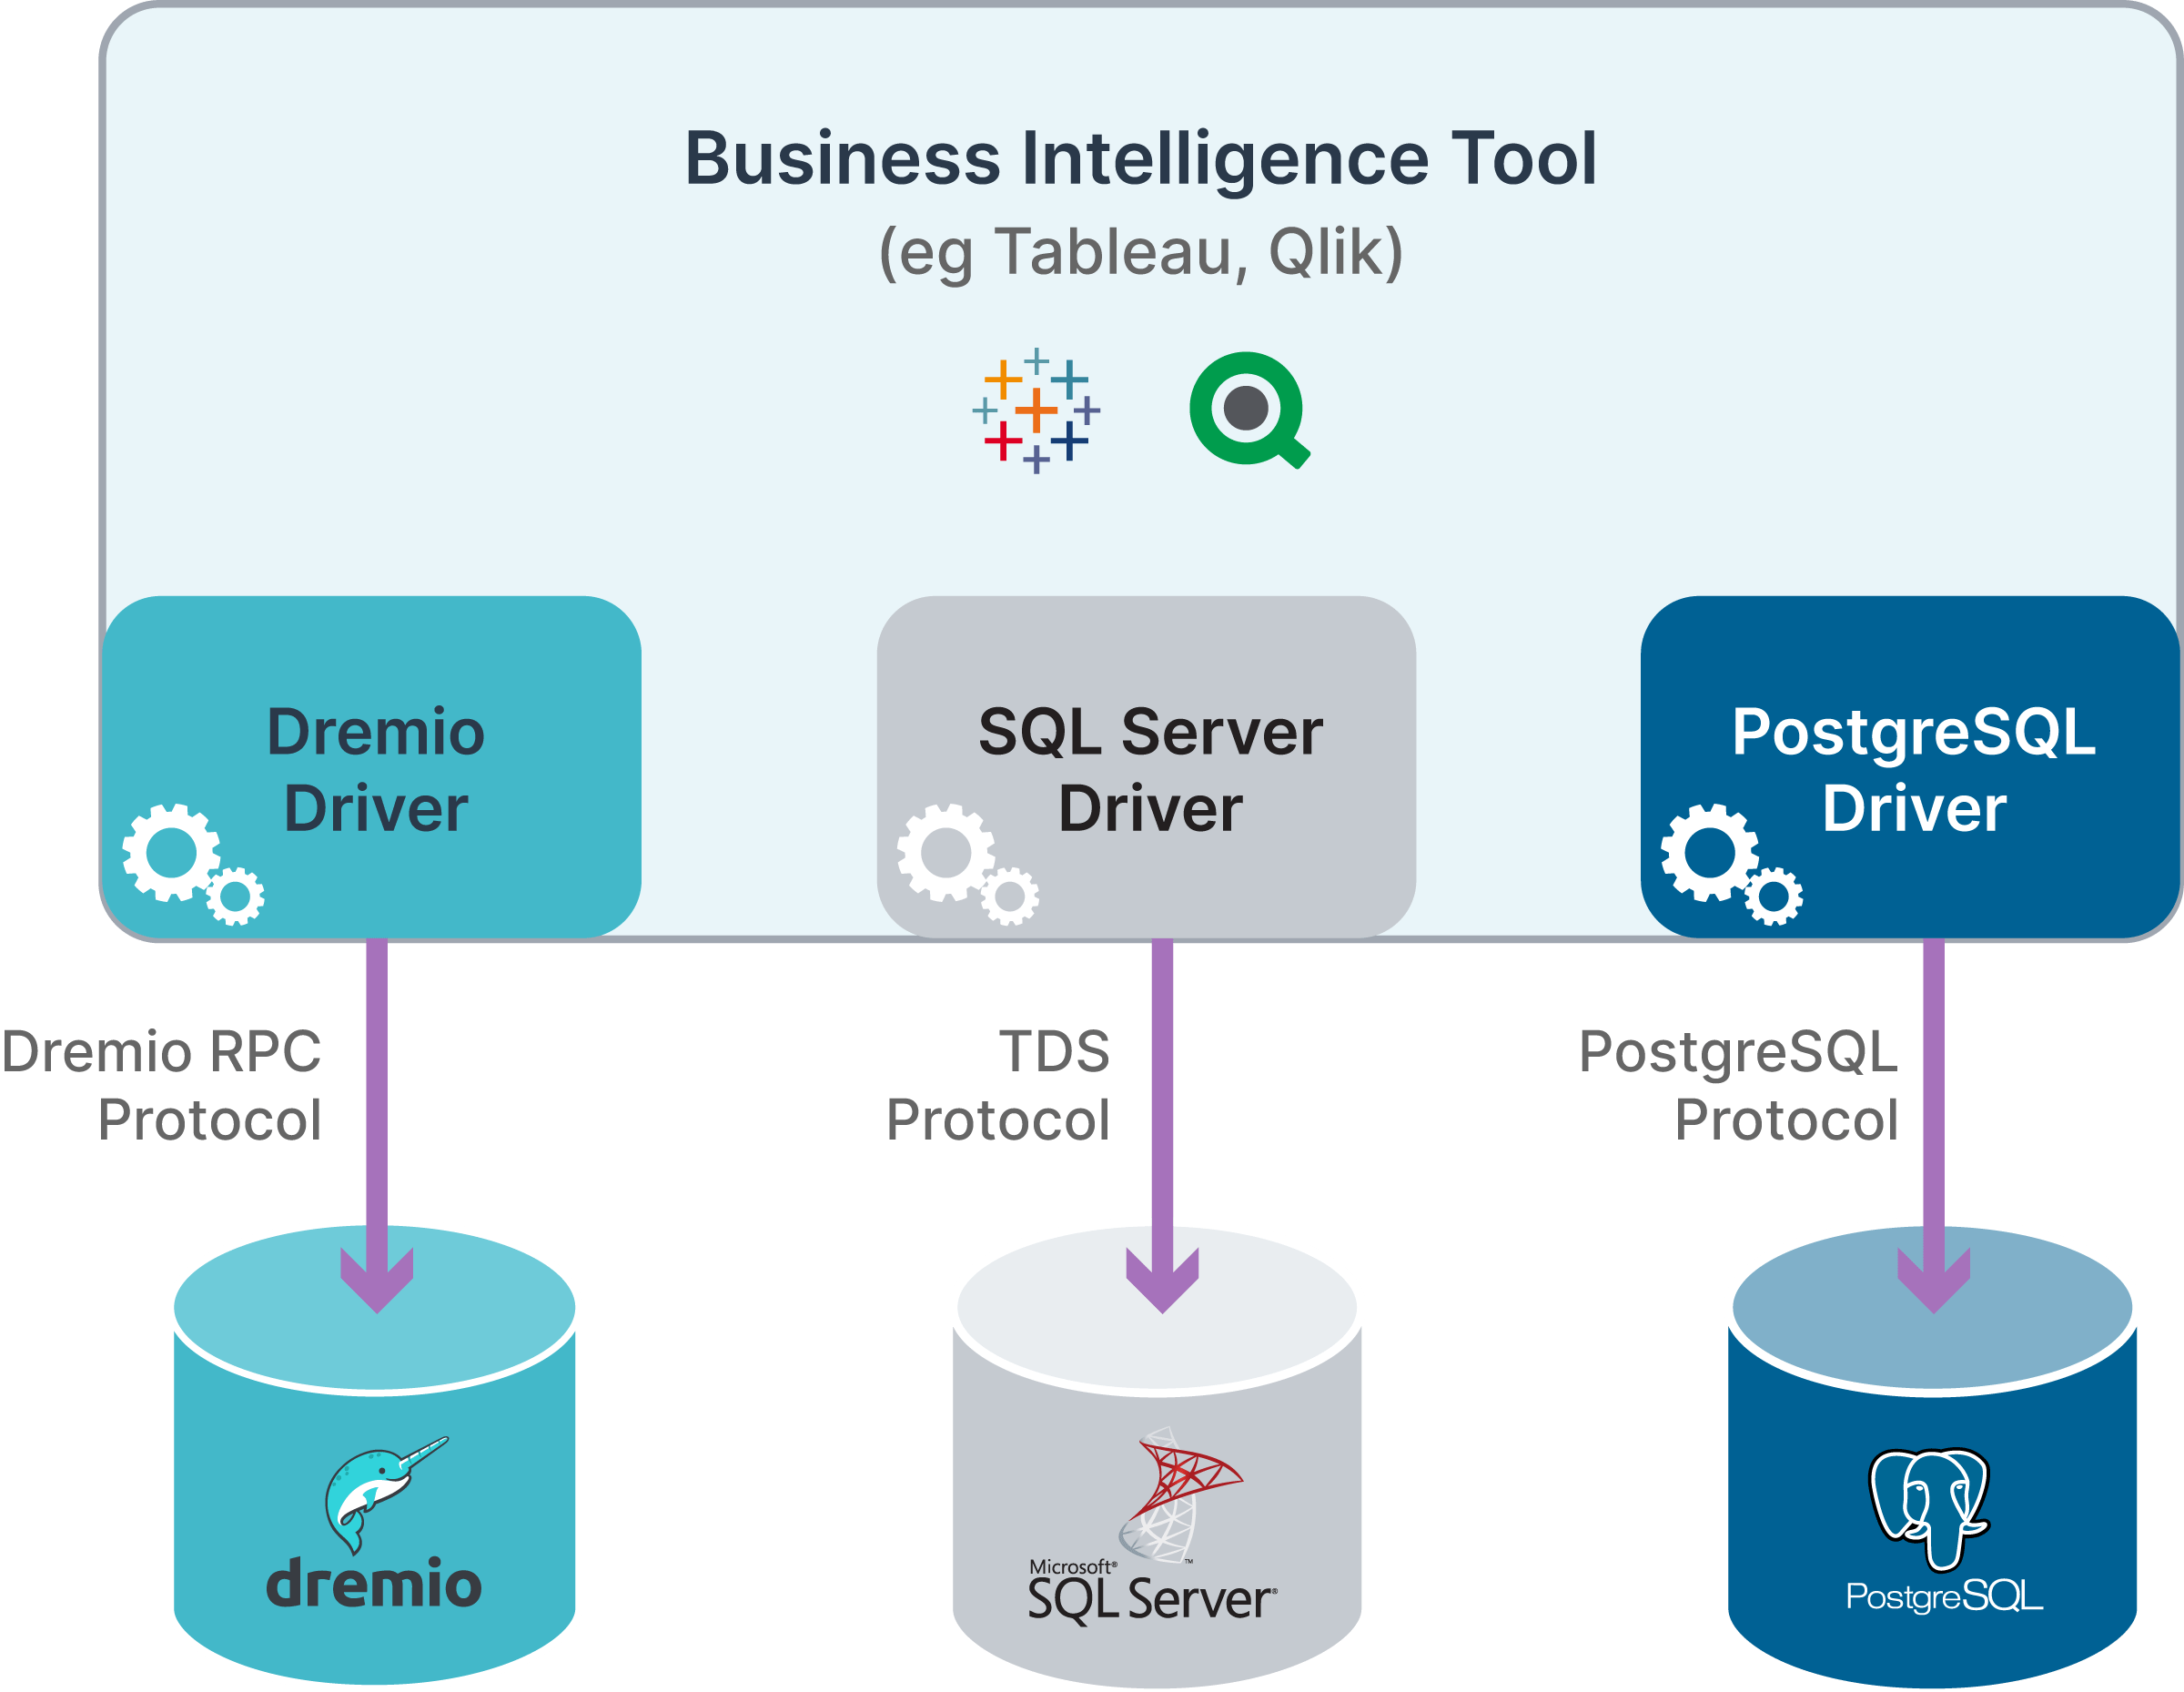 Figure 1. BI tools require drivers for each database they support